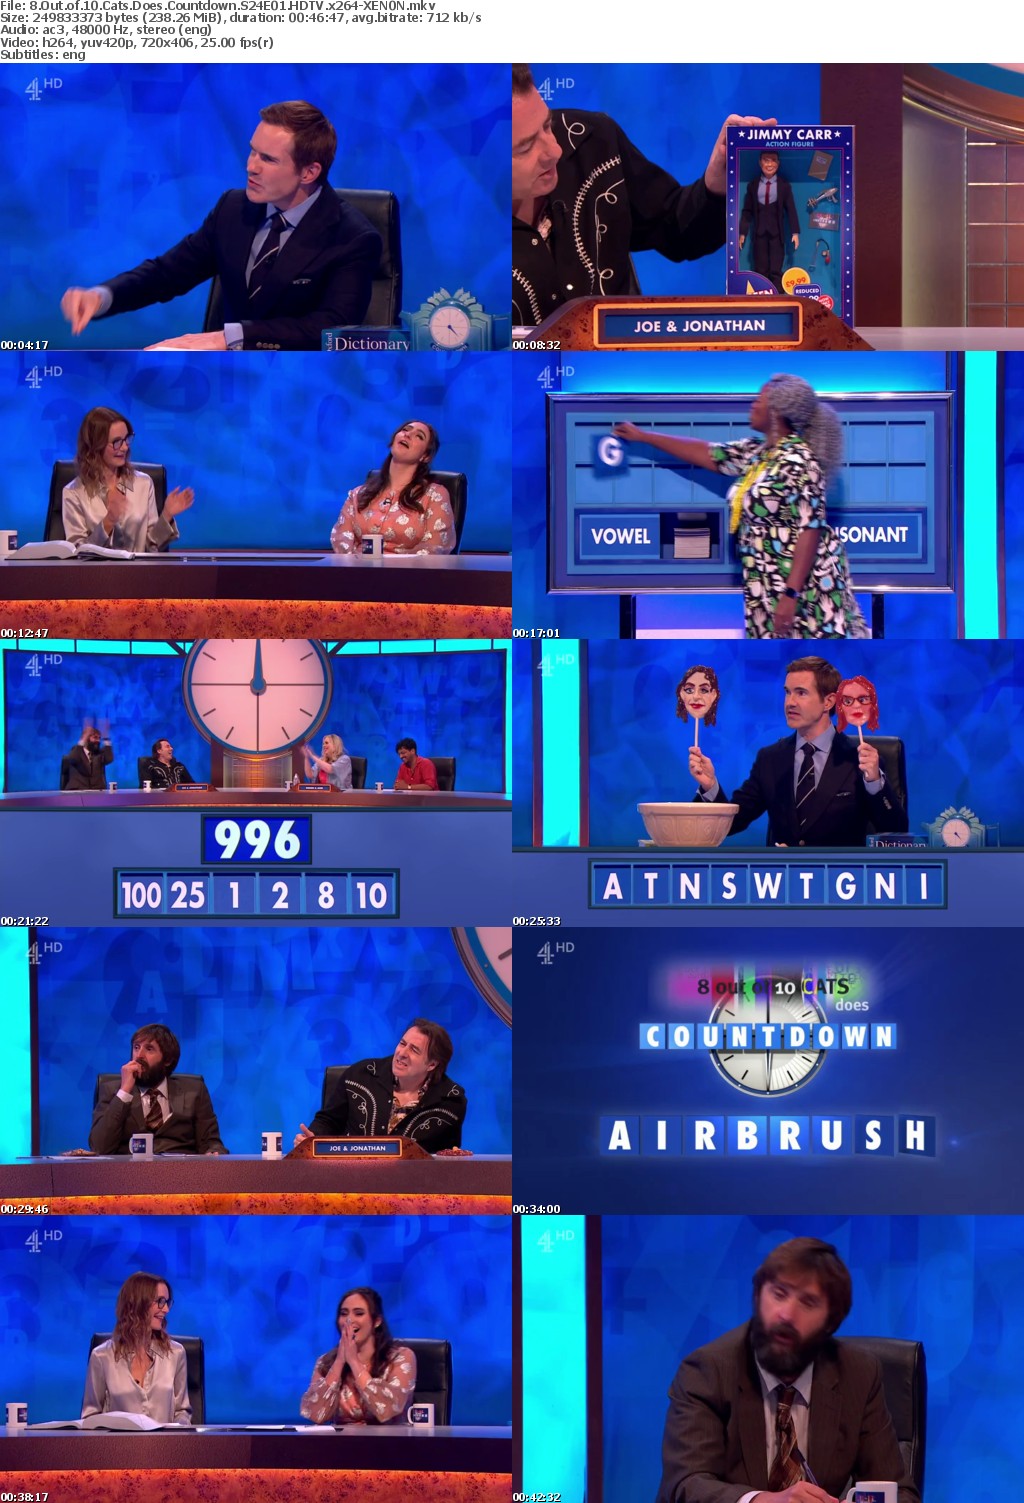 8 Out of 10 Cats Does Countdown S24E01 HDTV x264-XEN0N